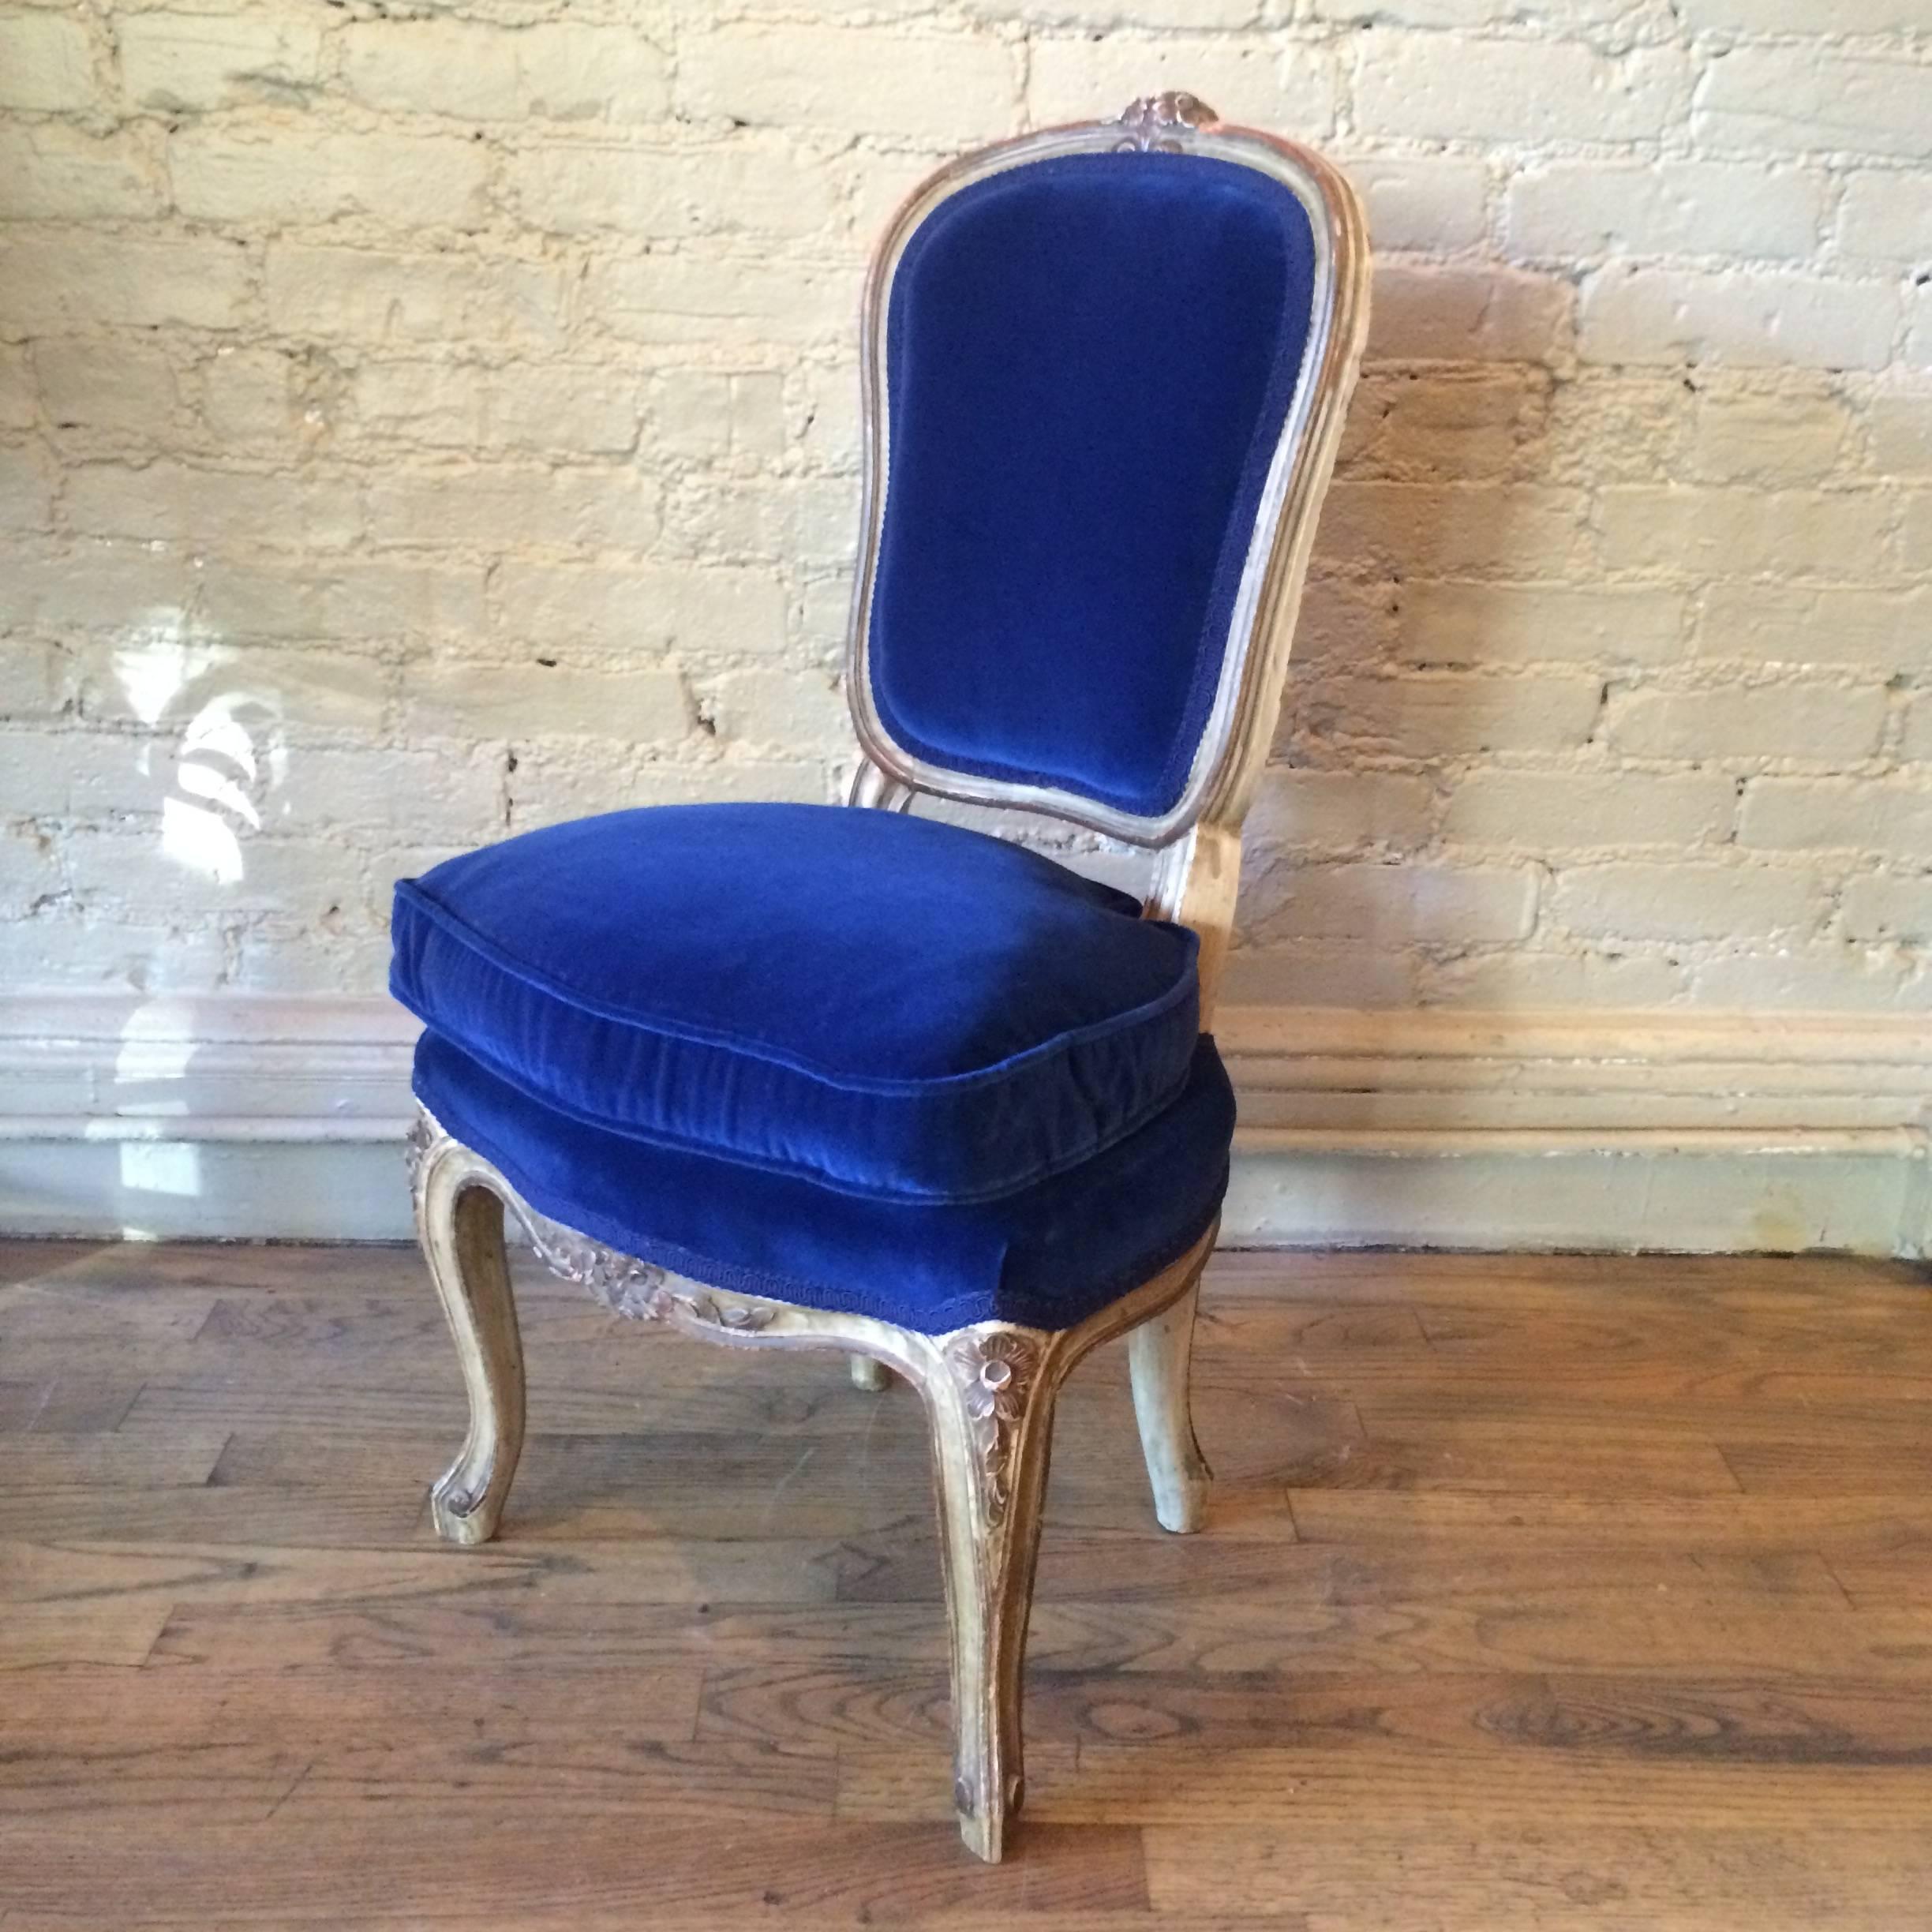 Charming, Louis XVI style, petite, vanity chair features a beautifully carved and gilded mahogany frame with lush blue velvet upholstery.